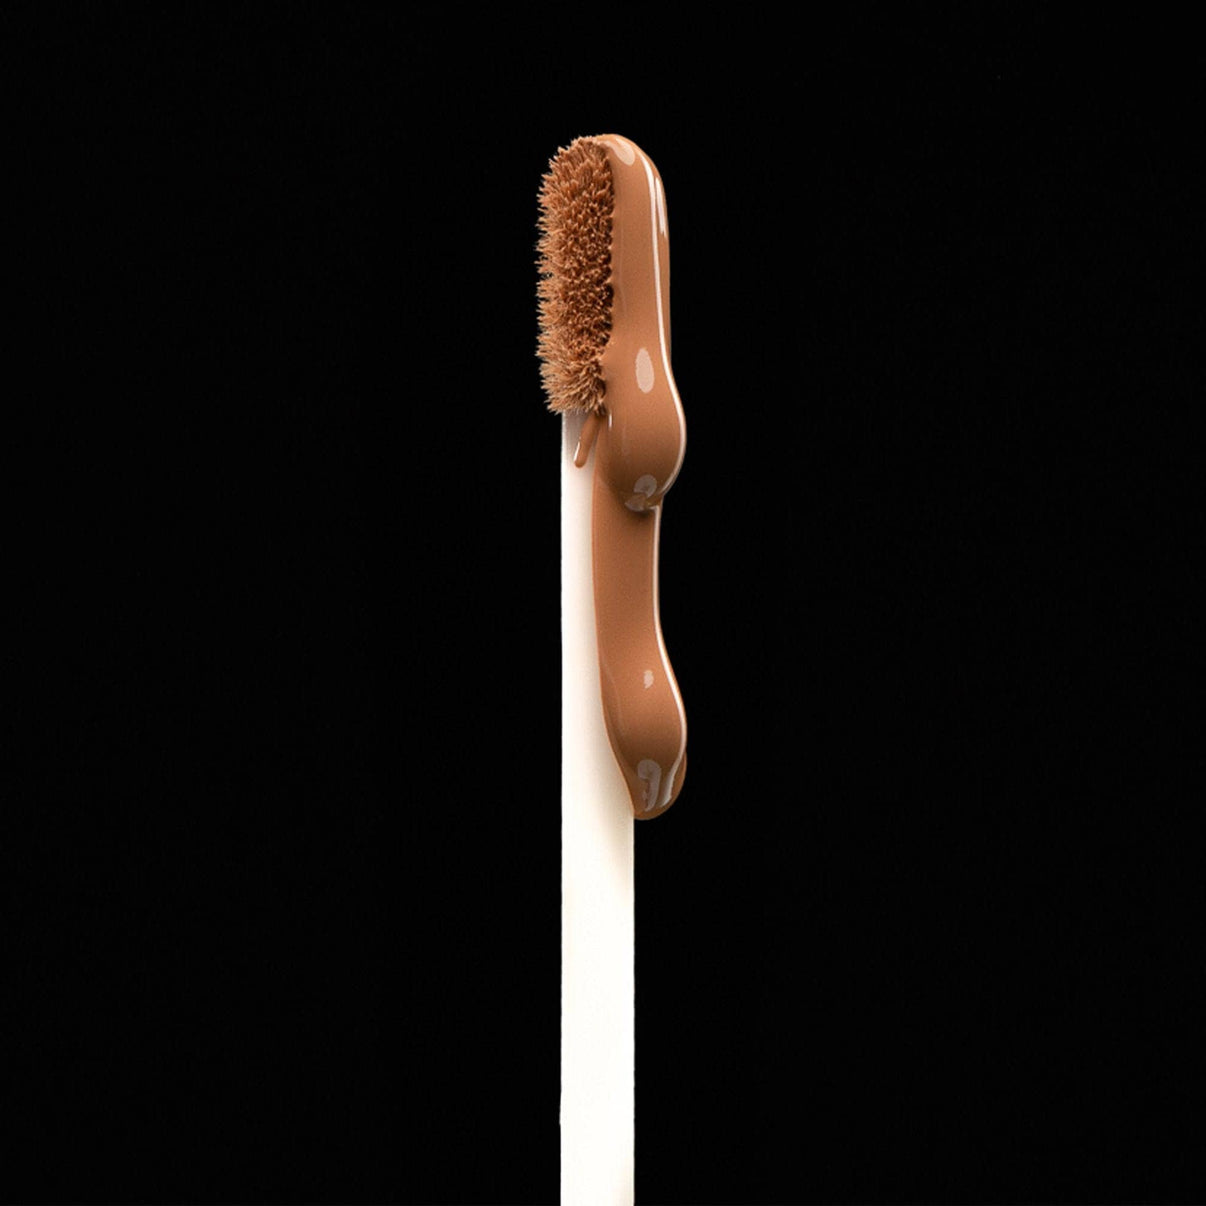 Nudefix cream concealer in shade nude 6 brush with product